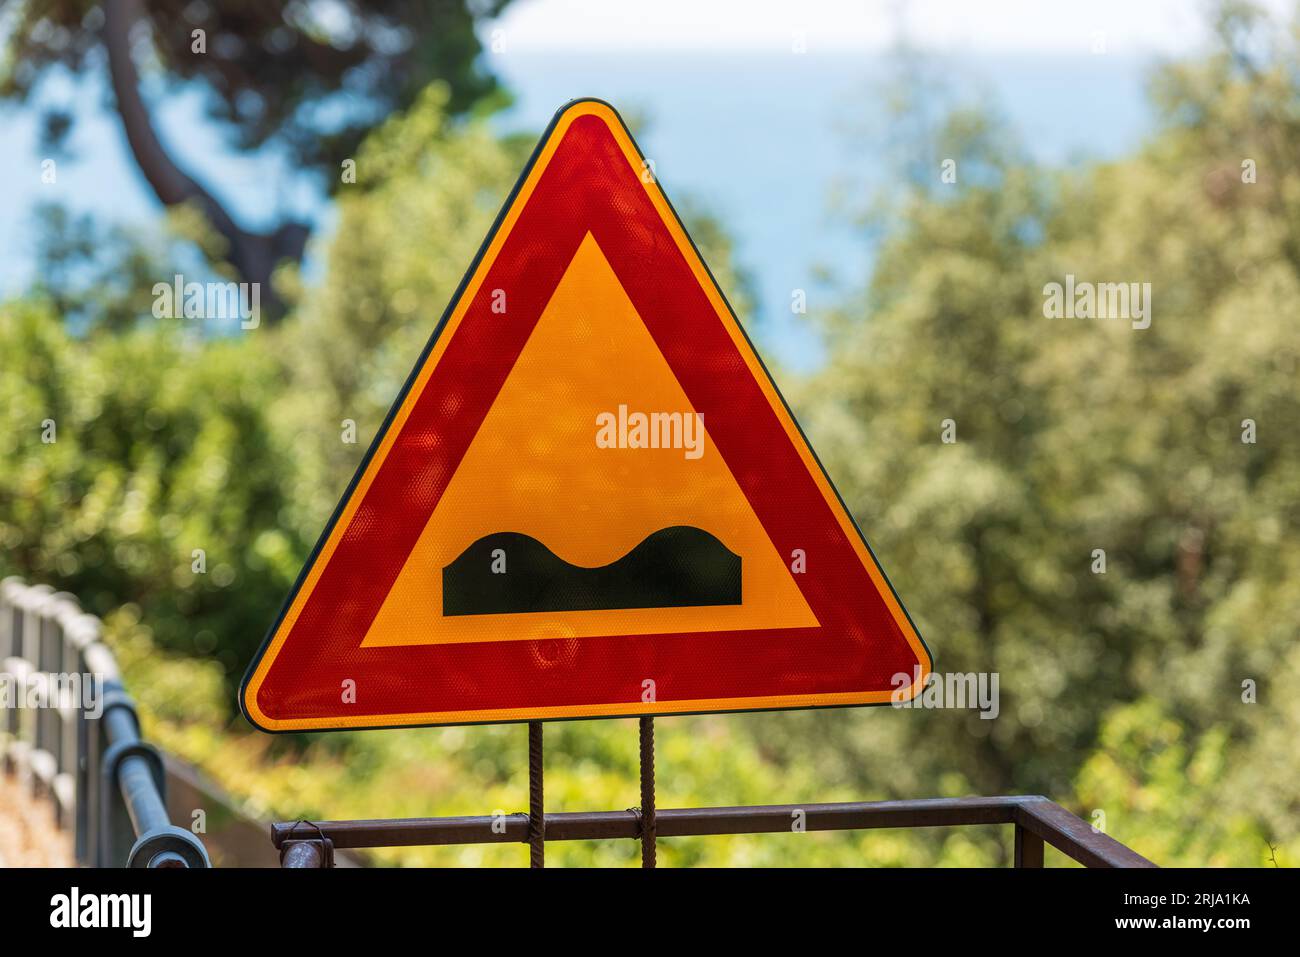 Triangular road sign of bumpy road. It is a danger sign that announces a deformed road, in bad condition, uneven or with irregular pavement. Stock Photo